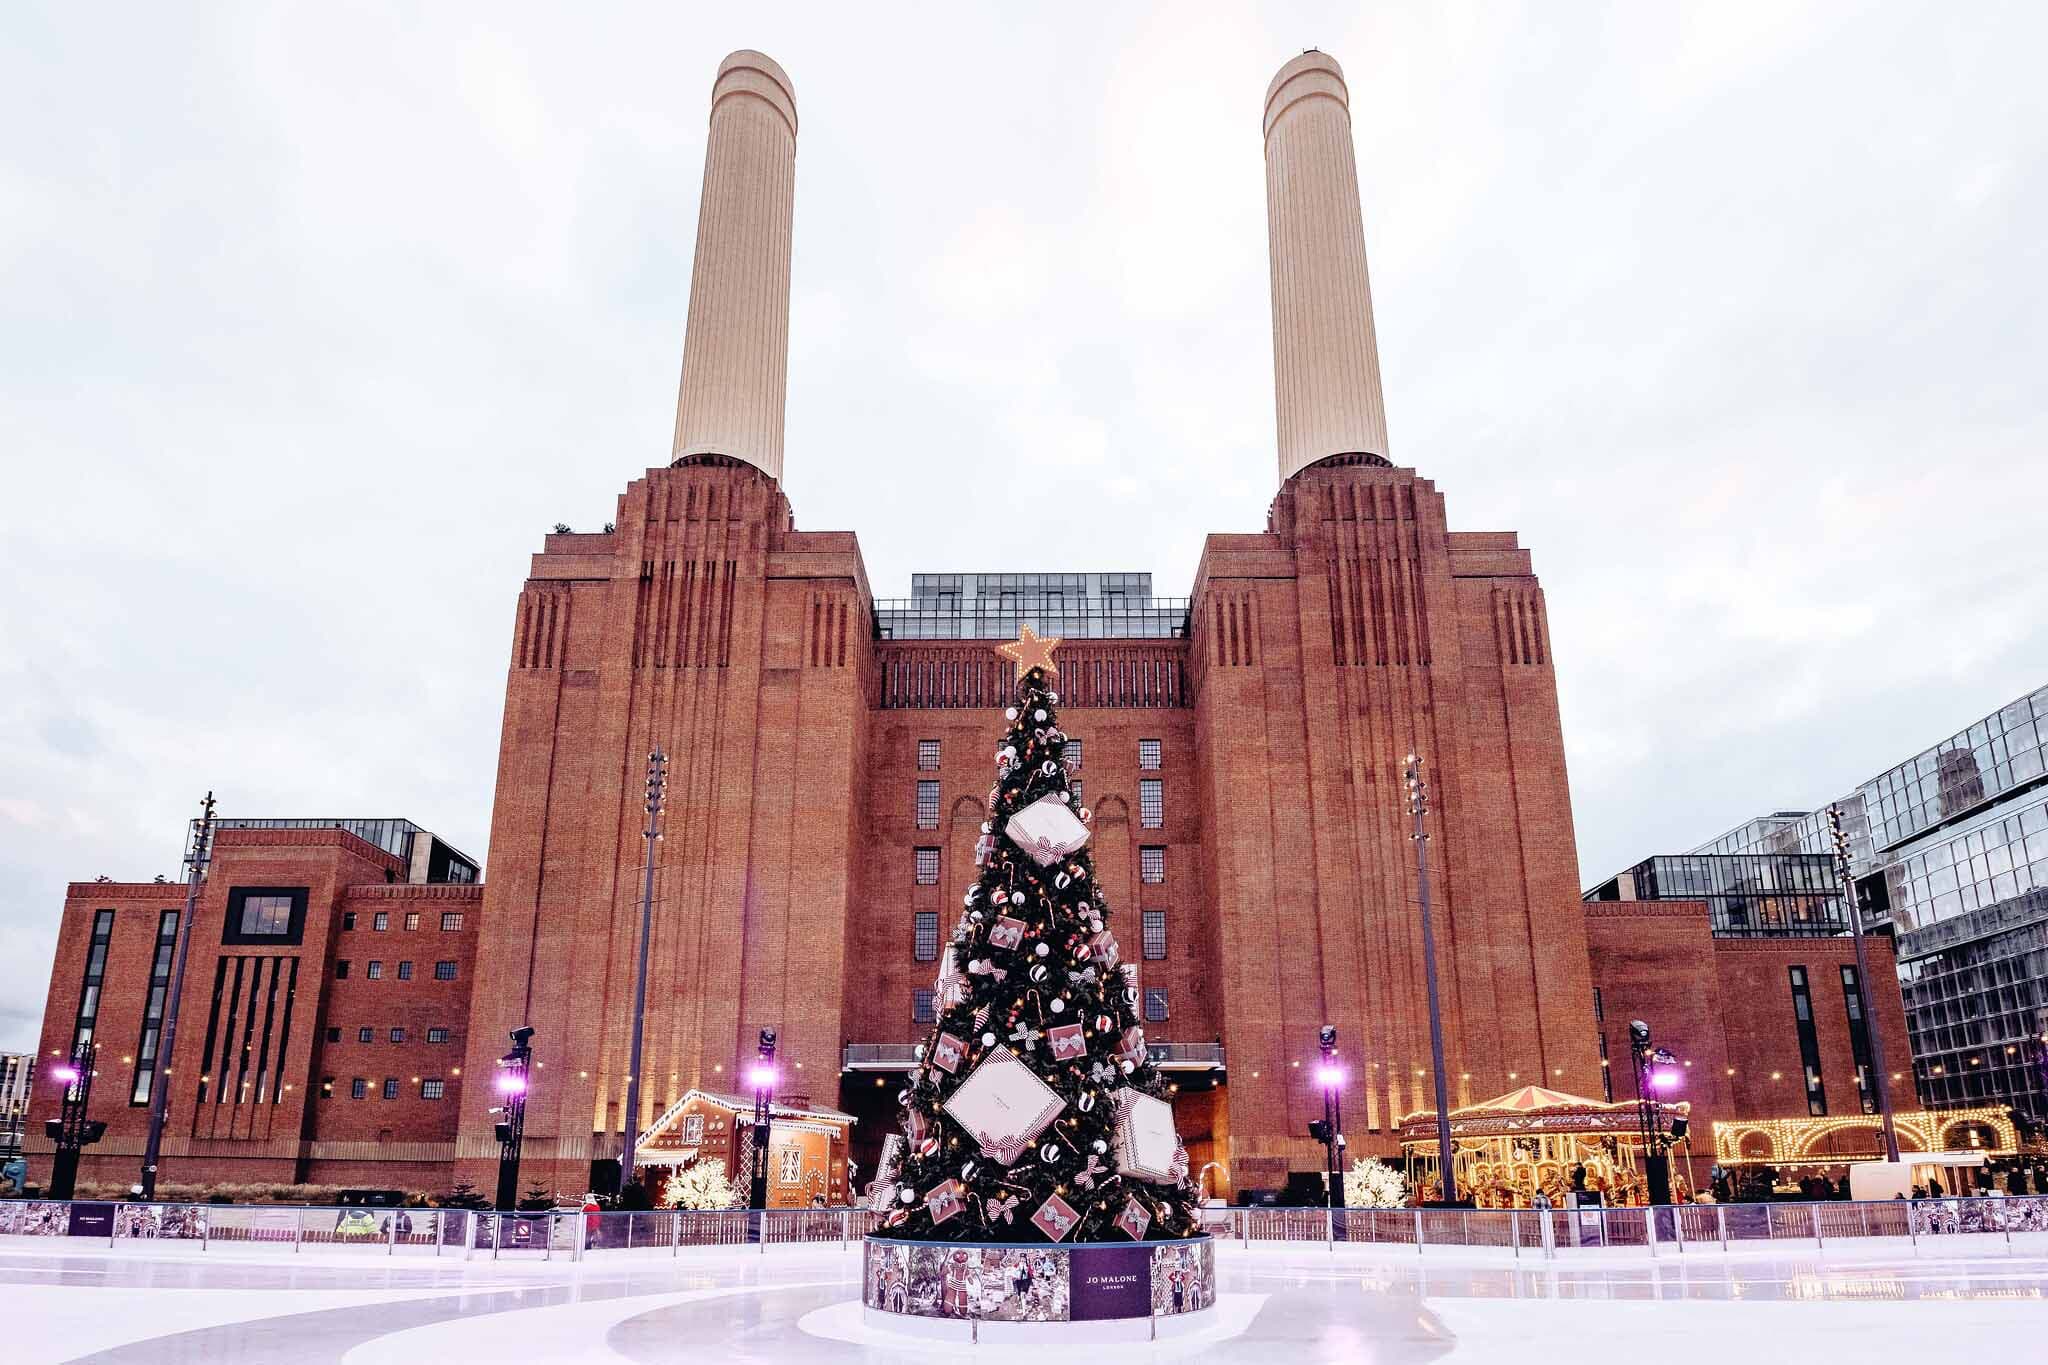 Battersea Power Station with a Christmas tree in front of it